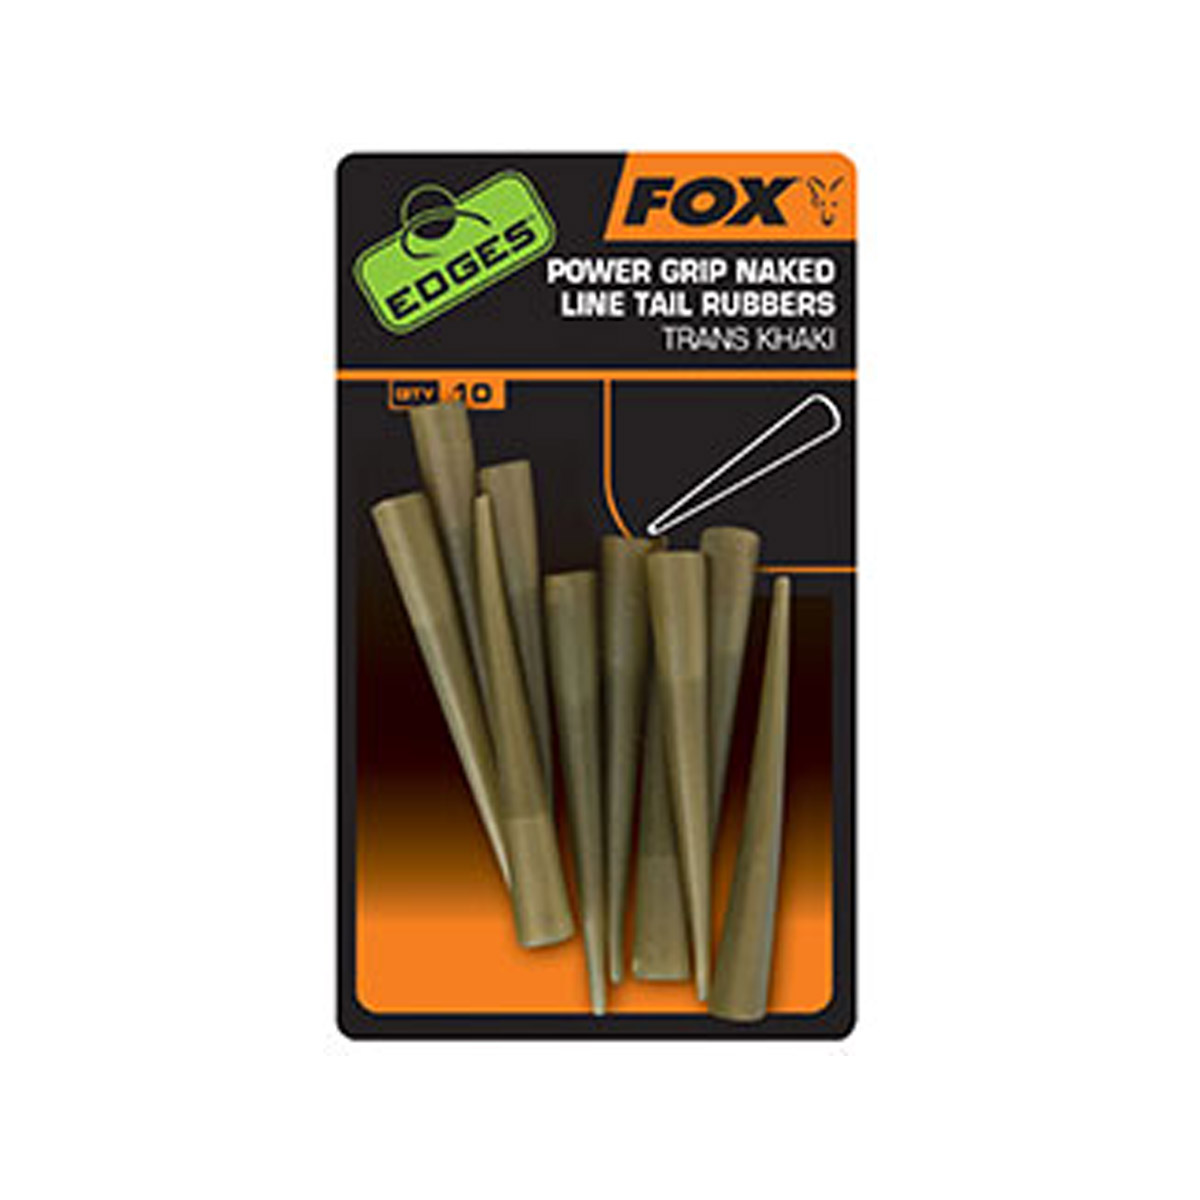 Fox EDGES™ Power Grip Naked Line Tail Rubbers